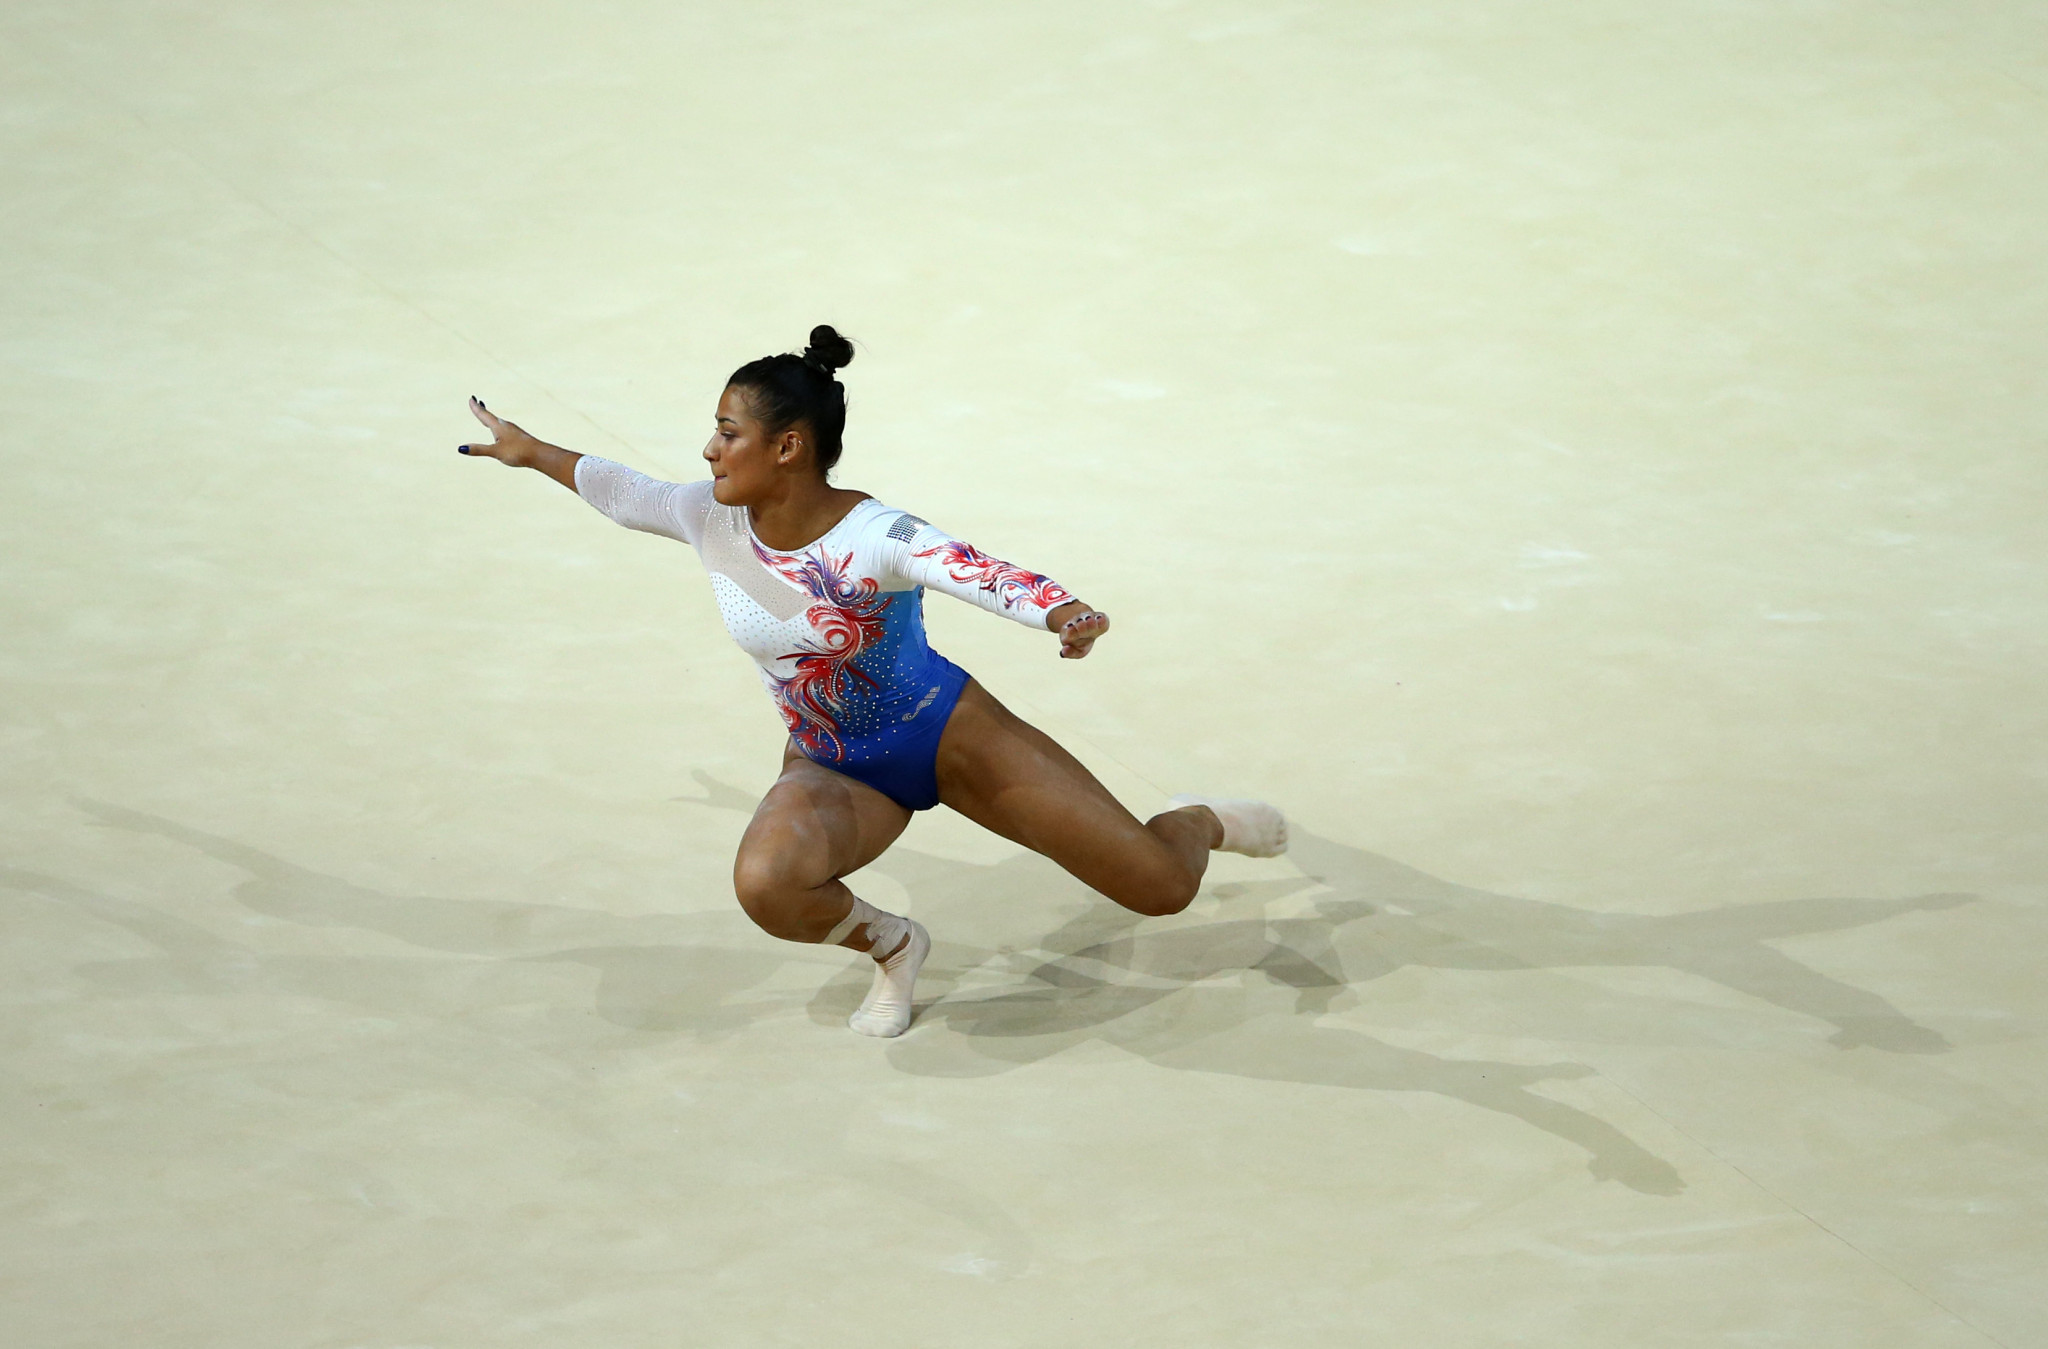 Marine Boyer was among France's winning quintet as artistic gymnastics competition got underway today at the Glasgow 2018 European Championships ©Getty Images